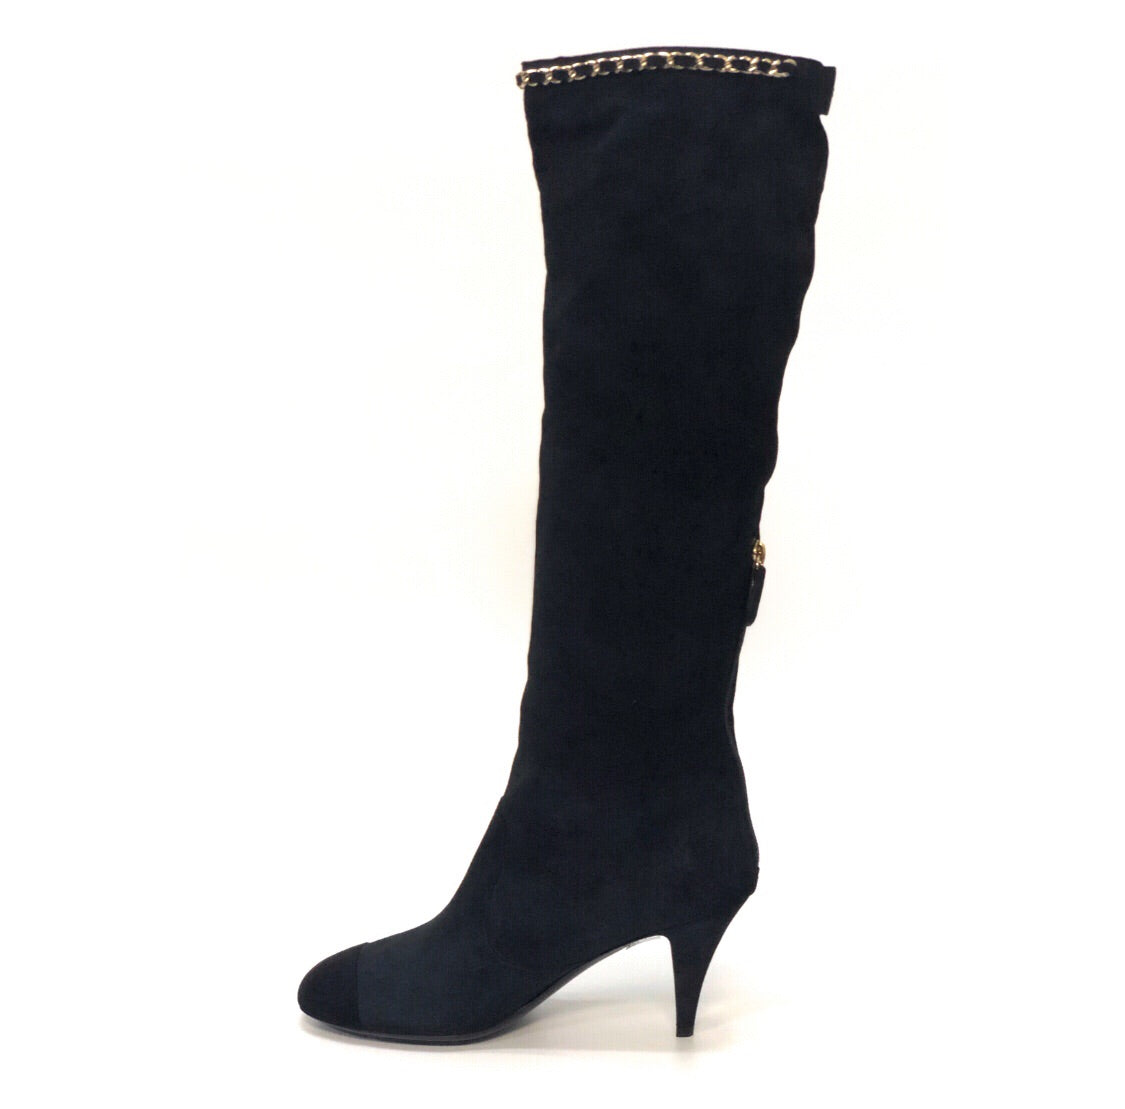 Chanel Chain Trim Knee High Boots